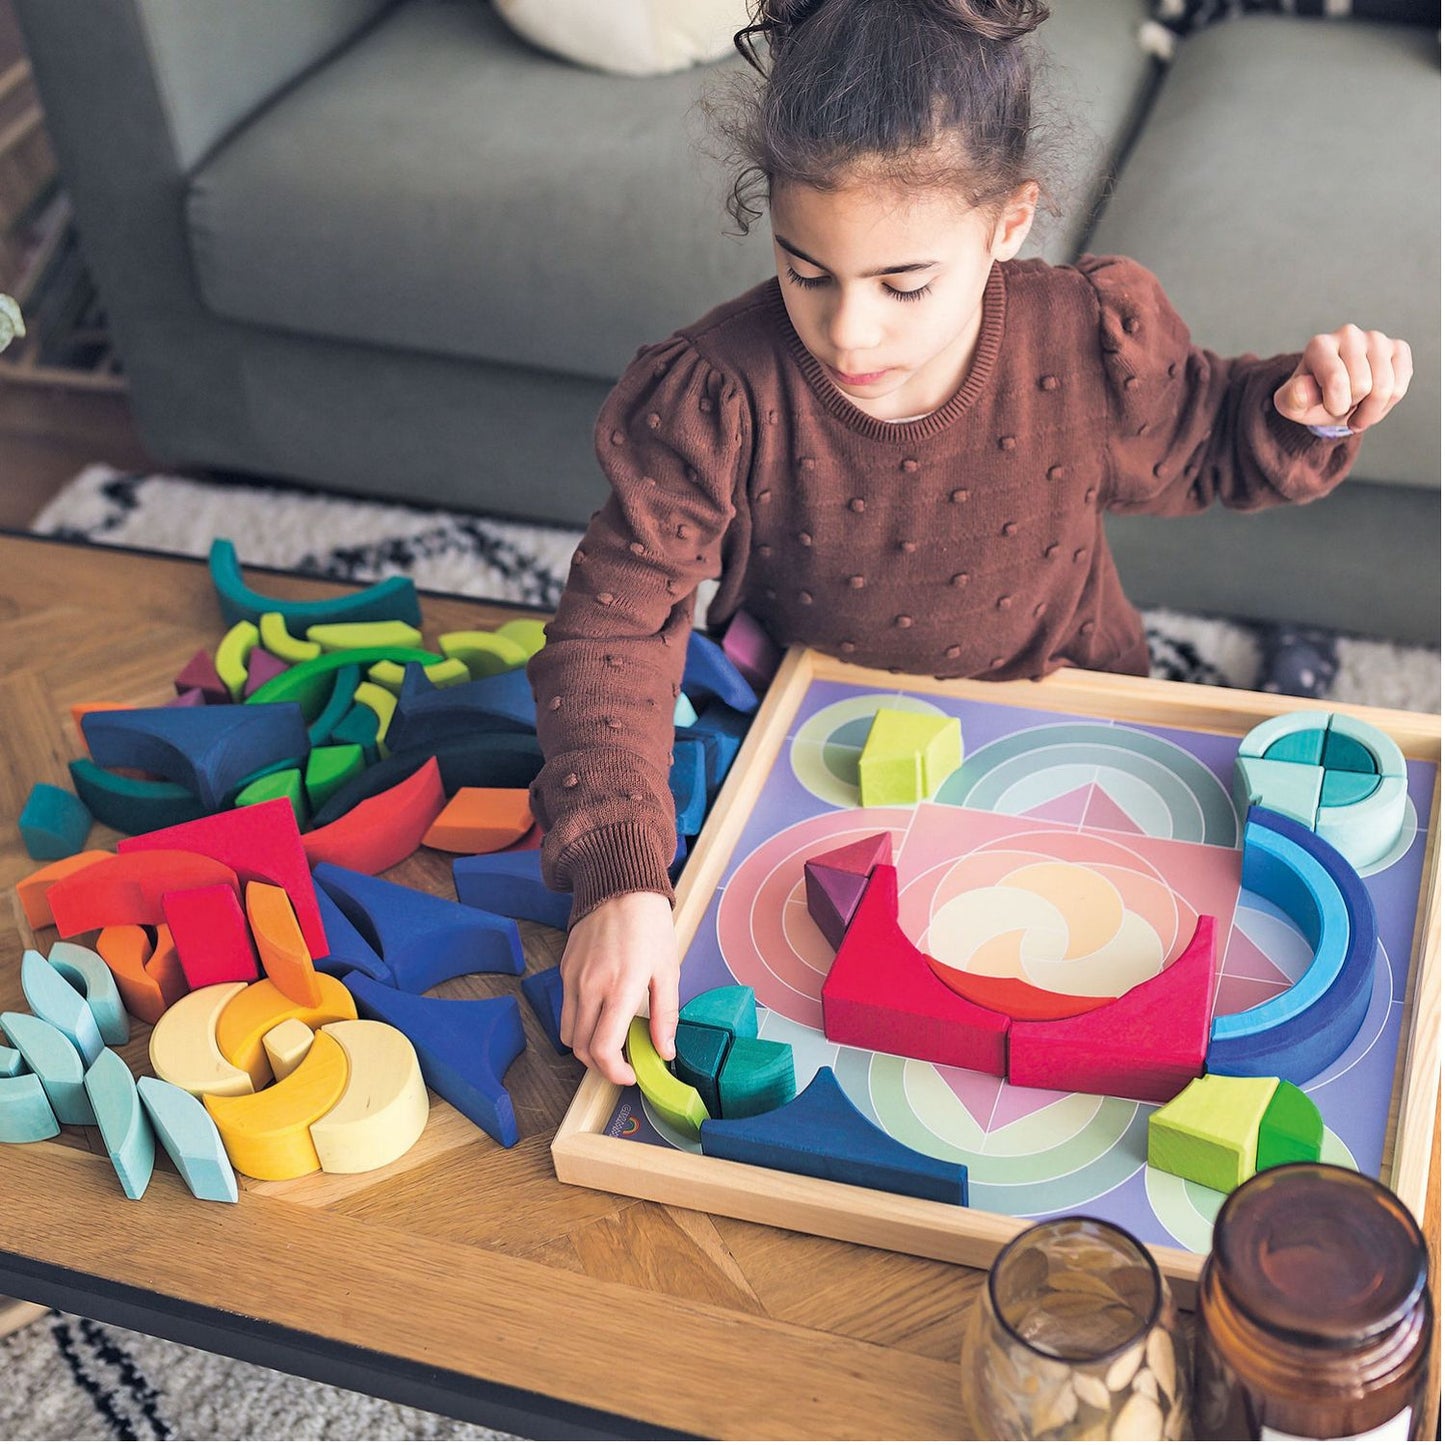 Arcs In Squares | Building Set | Wooden Toys for Kids | Open-Ended Play